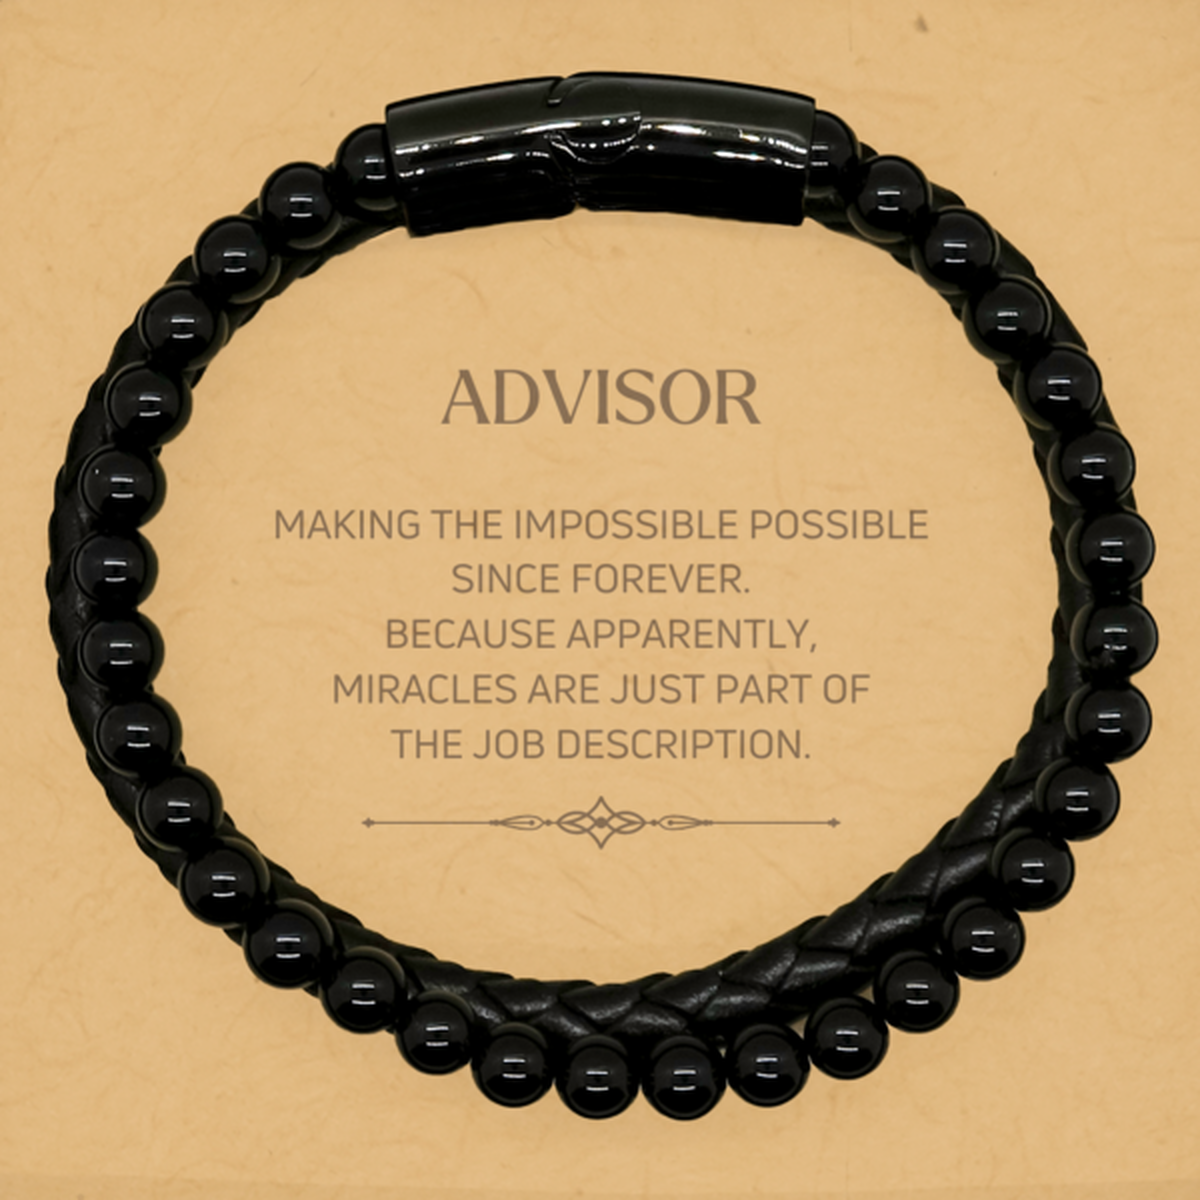 Funny Advisor Gifts, Miracles are just part of the job description, Inspirational Birthday Stone Leather Bracelets For Advisor, Men, Women, Coworkers, Friends, Boss